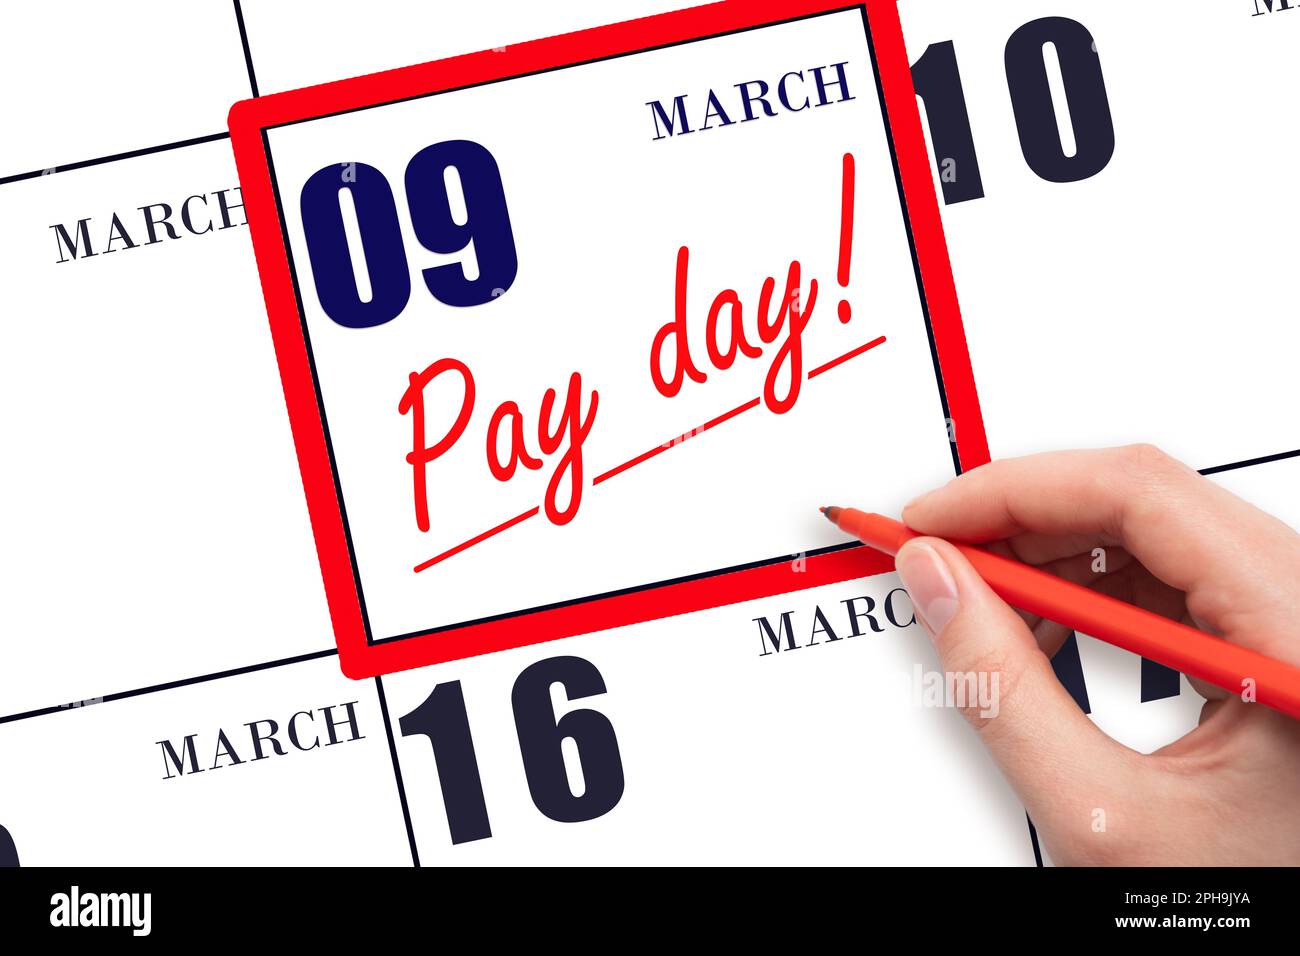 9th day of March. Hand writing text PAY DATE on calendar date March 9 and underline it. Payment due date.  Reminder concept of payment. Spring month, Stock Photo